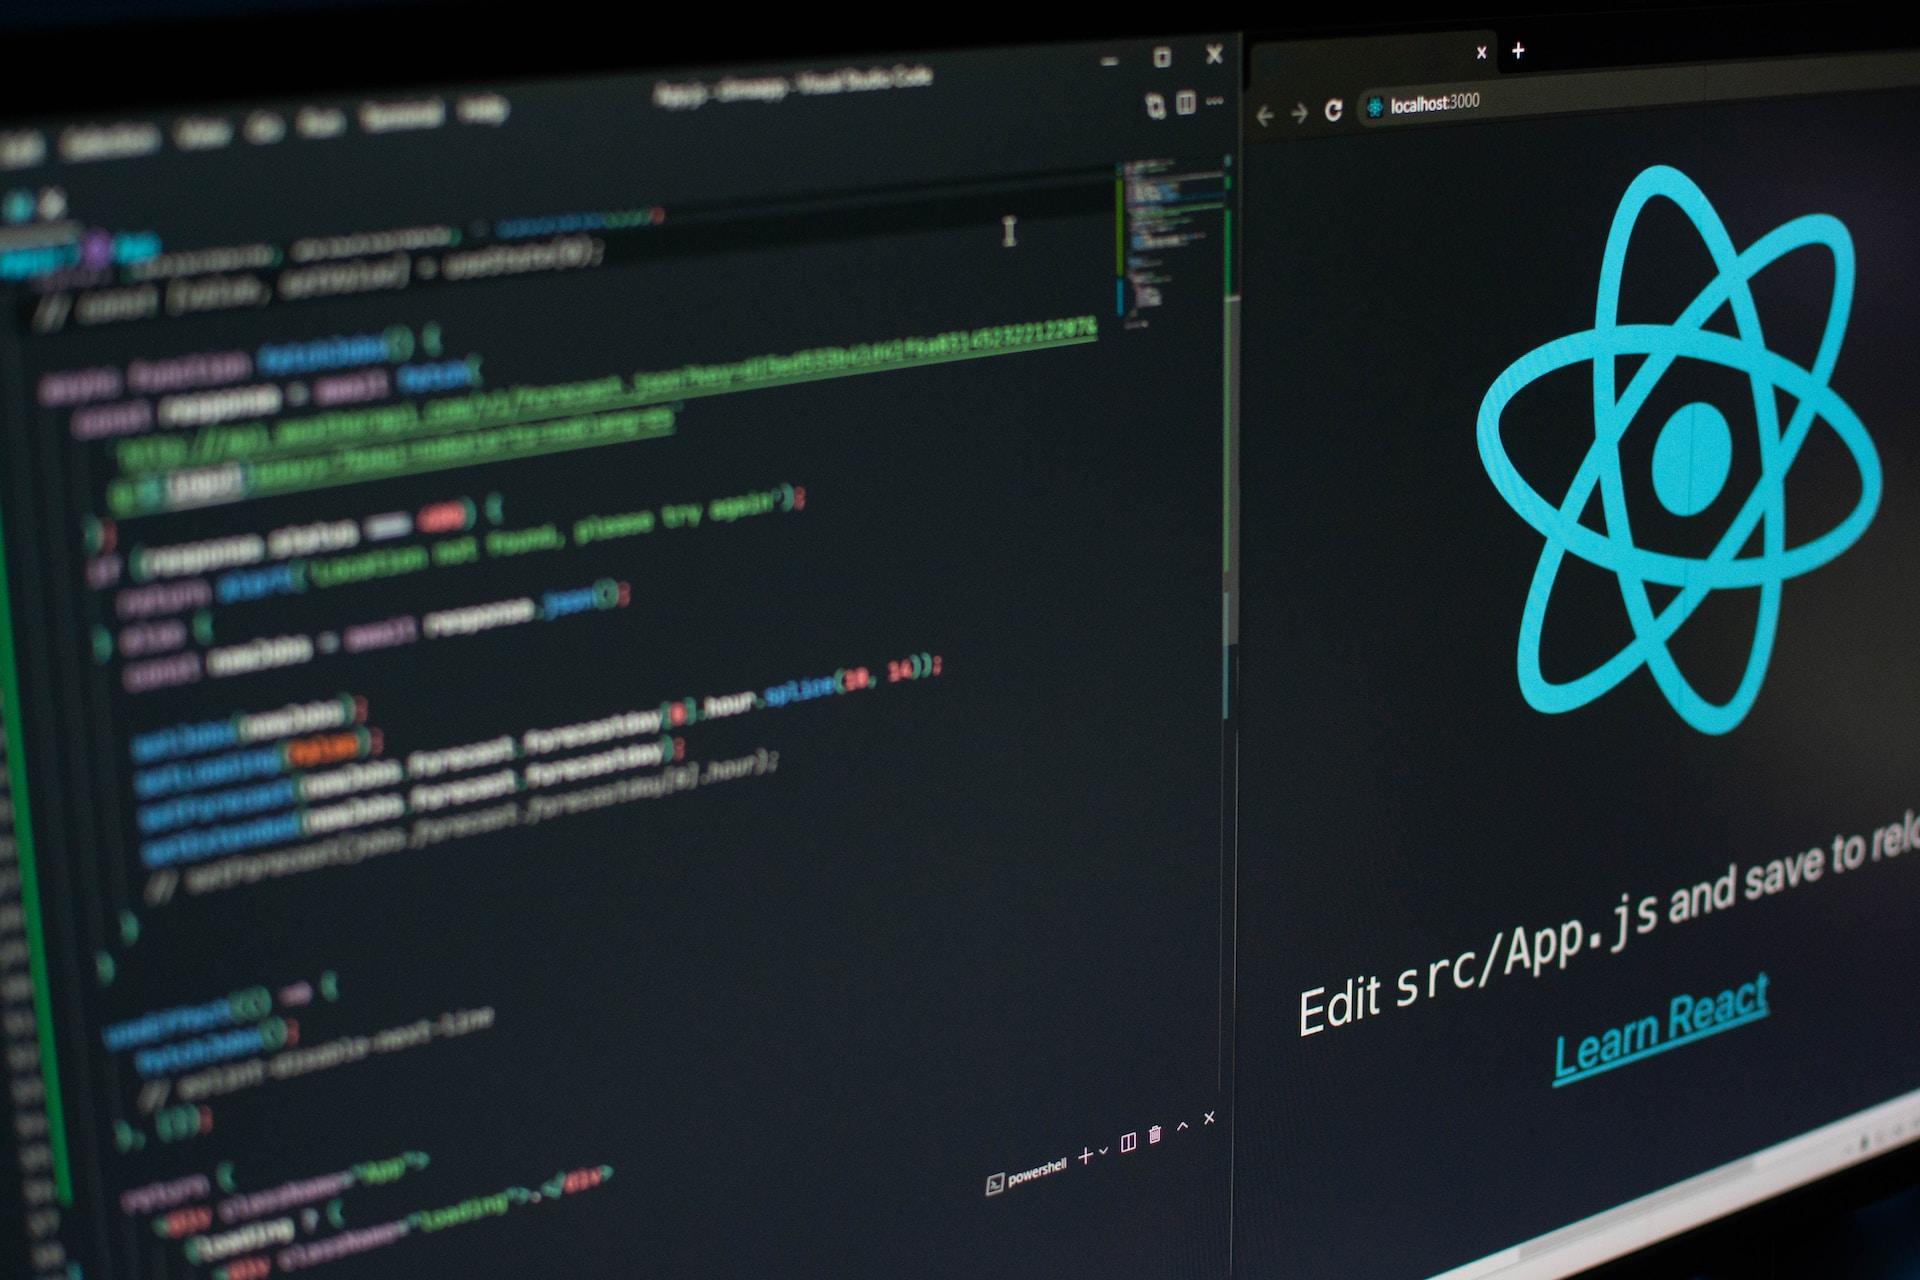 The screen with some react code